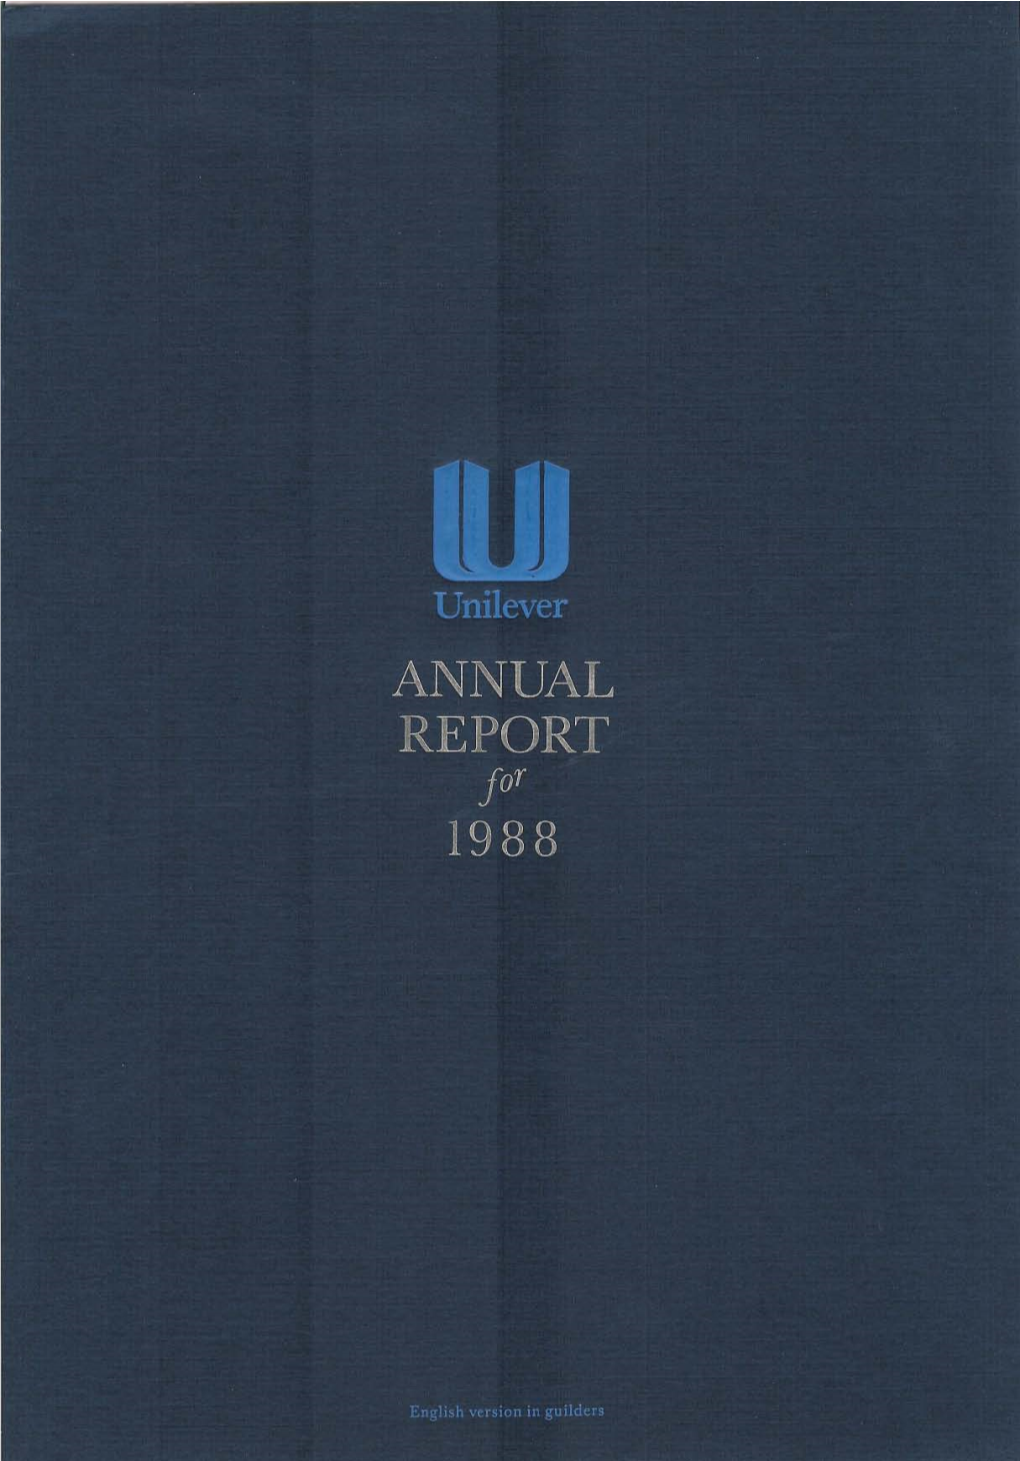 Annual Review 1988